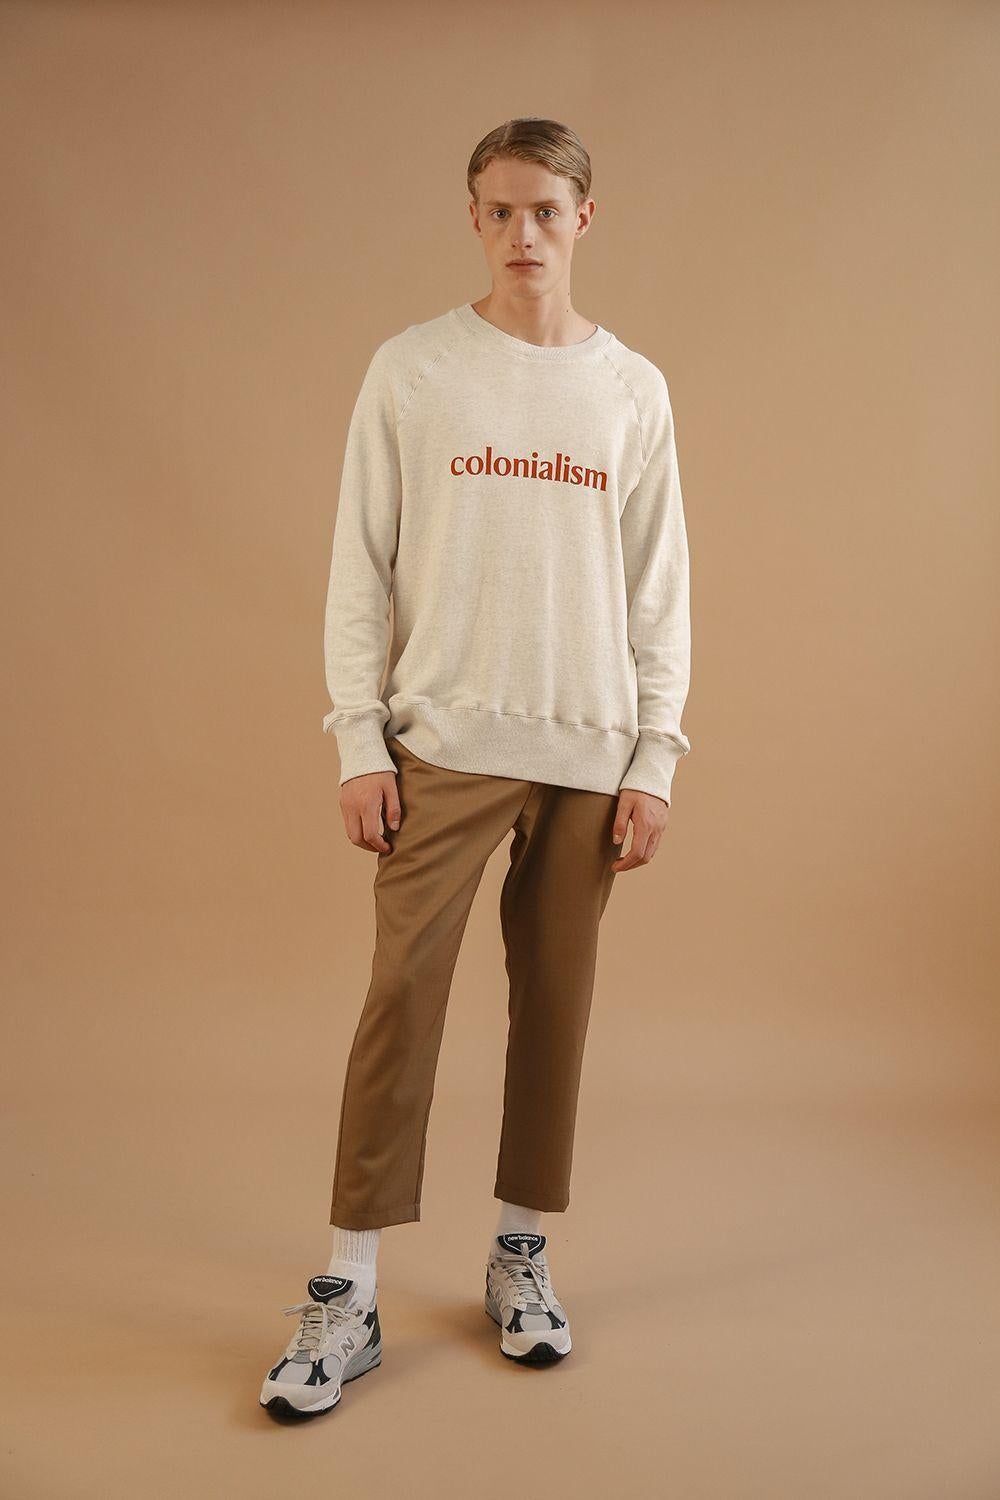 Controversial: The SS18 'Colonial Deal' collection